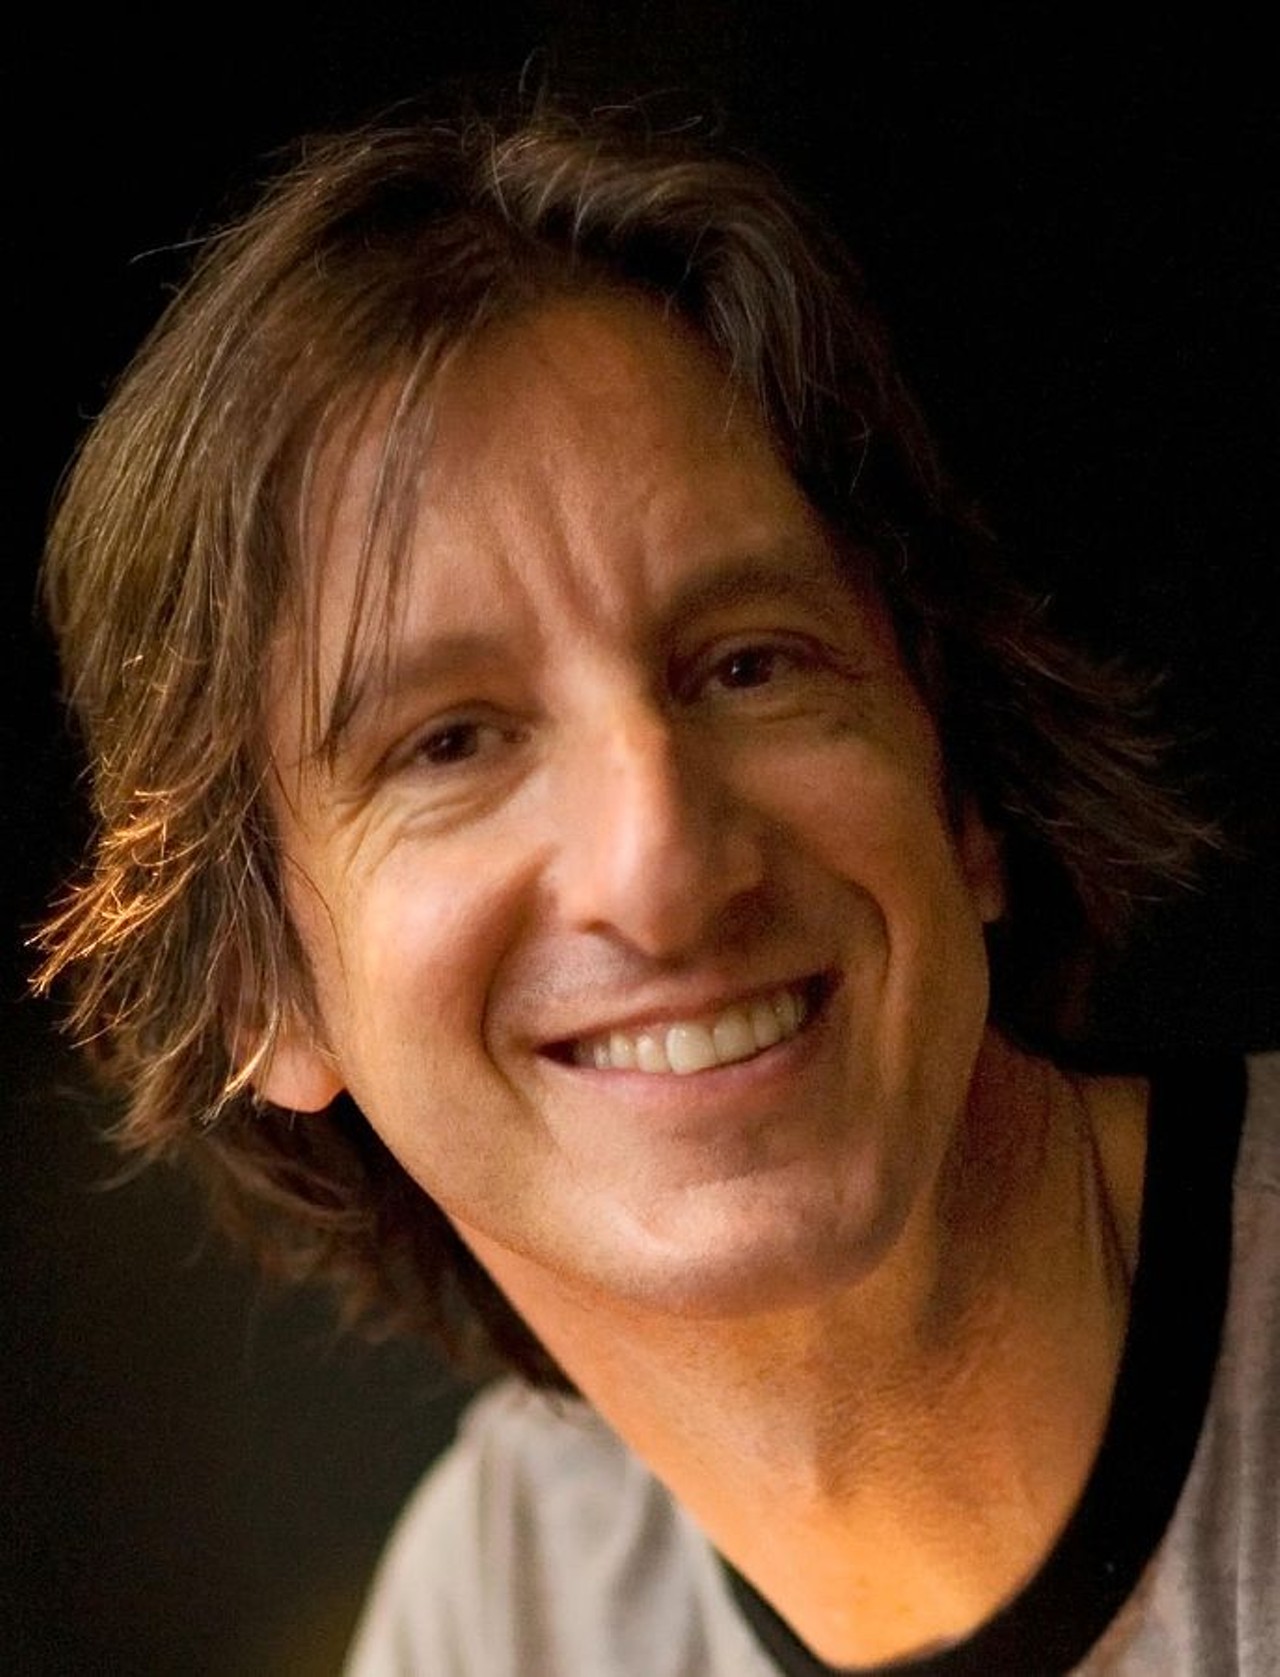 Andy Borowitz
Shake Heights High School
You may know Andy Borowitz as a writer, comedian and satirist. He created the sitcom "The Fresh Prince of Bel-Air" and his column The Borowitz Report.
Photo via Dionic/Wikimedia Commons